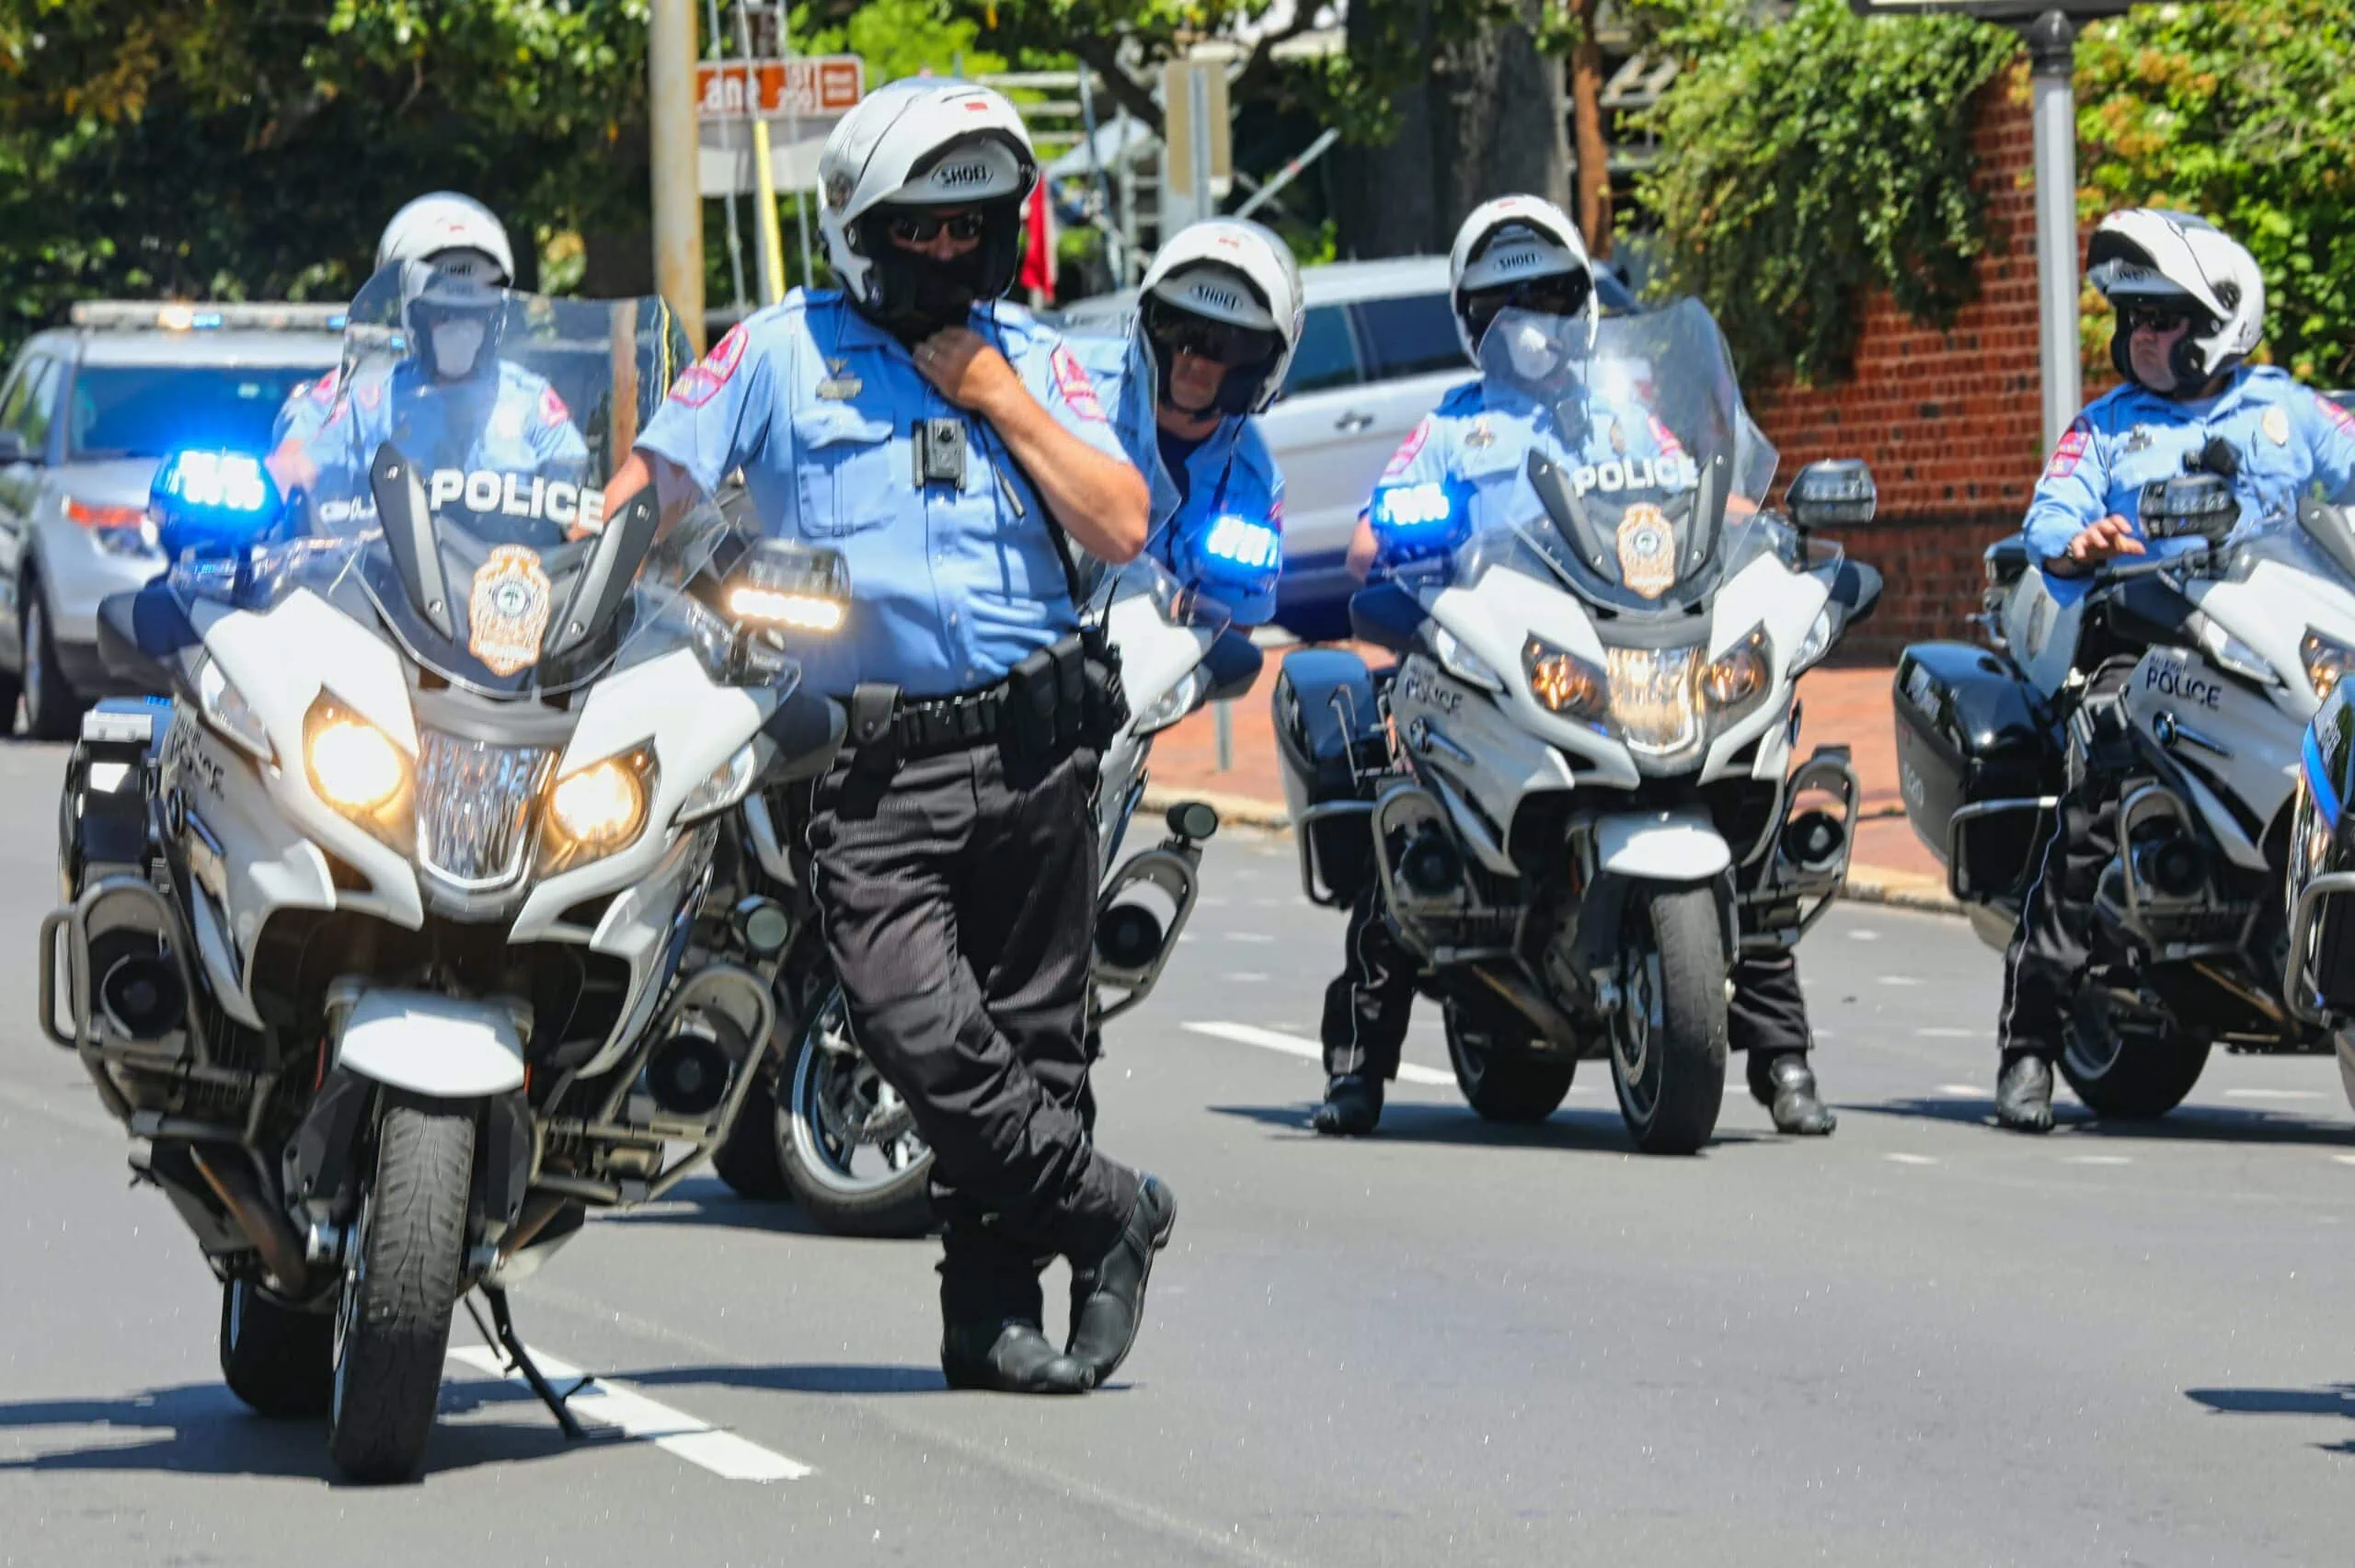 Police drivers on motorcycle following stolen fleet because it has a GPS-enabled dash cam